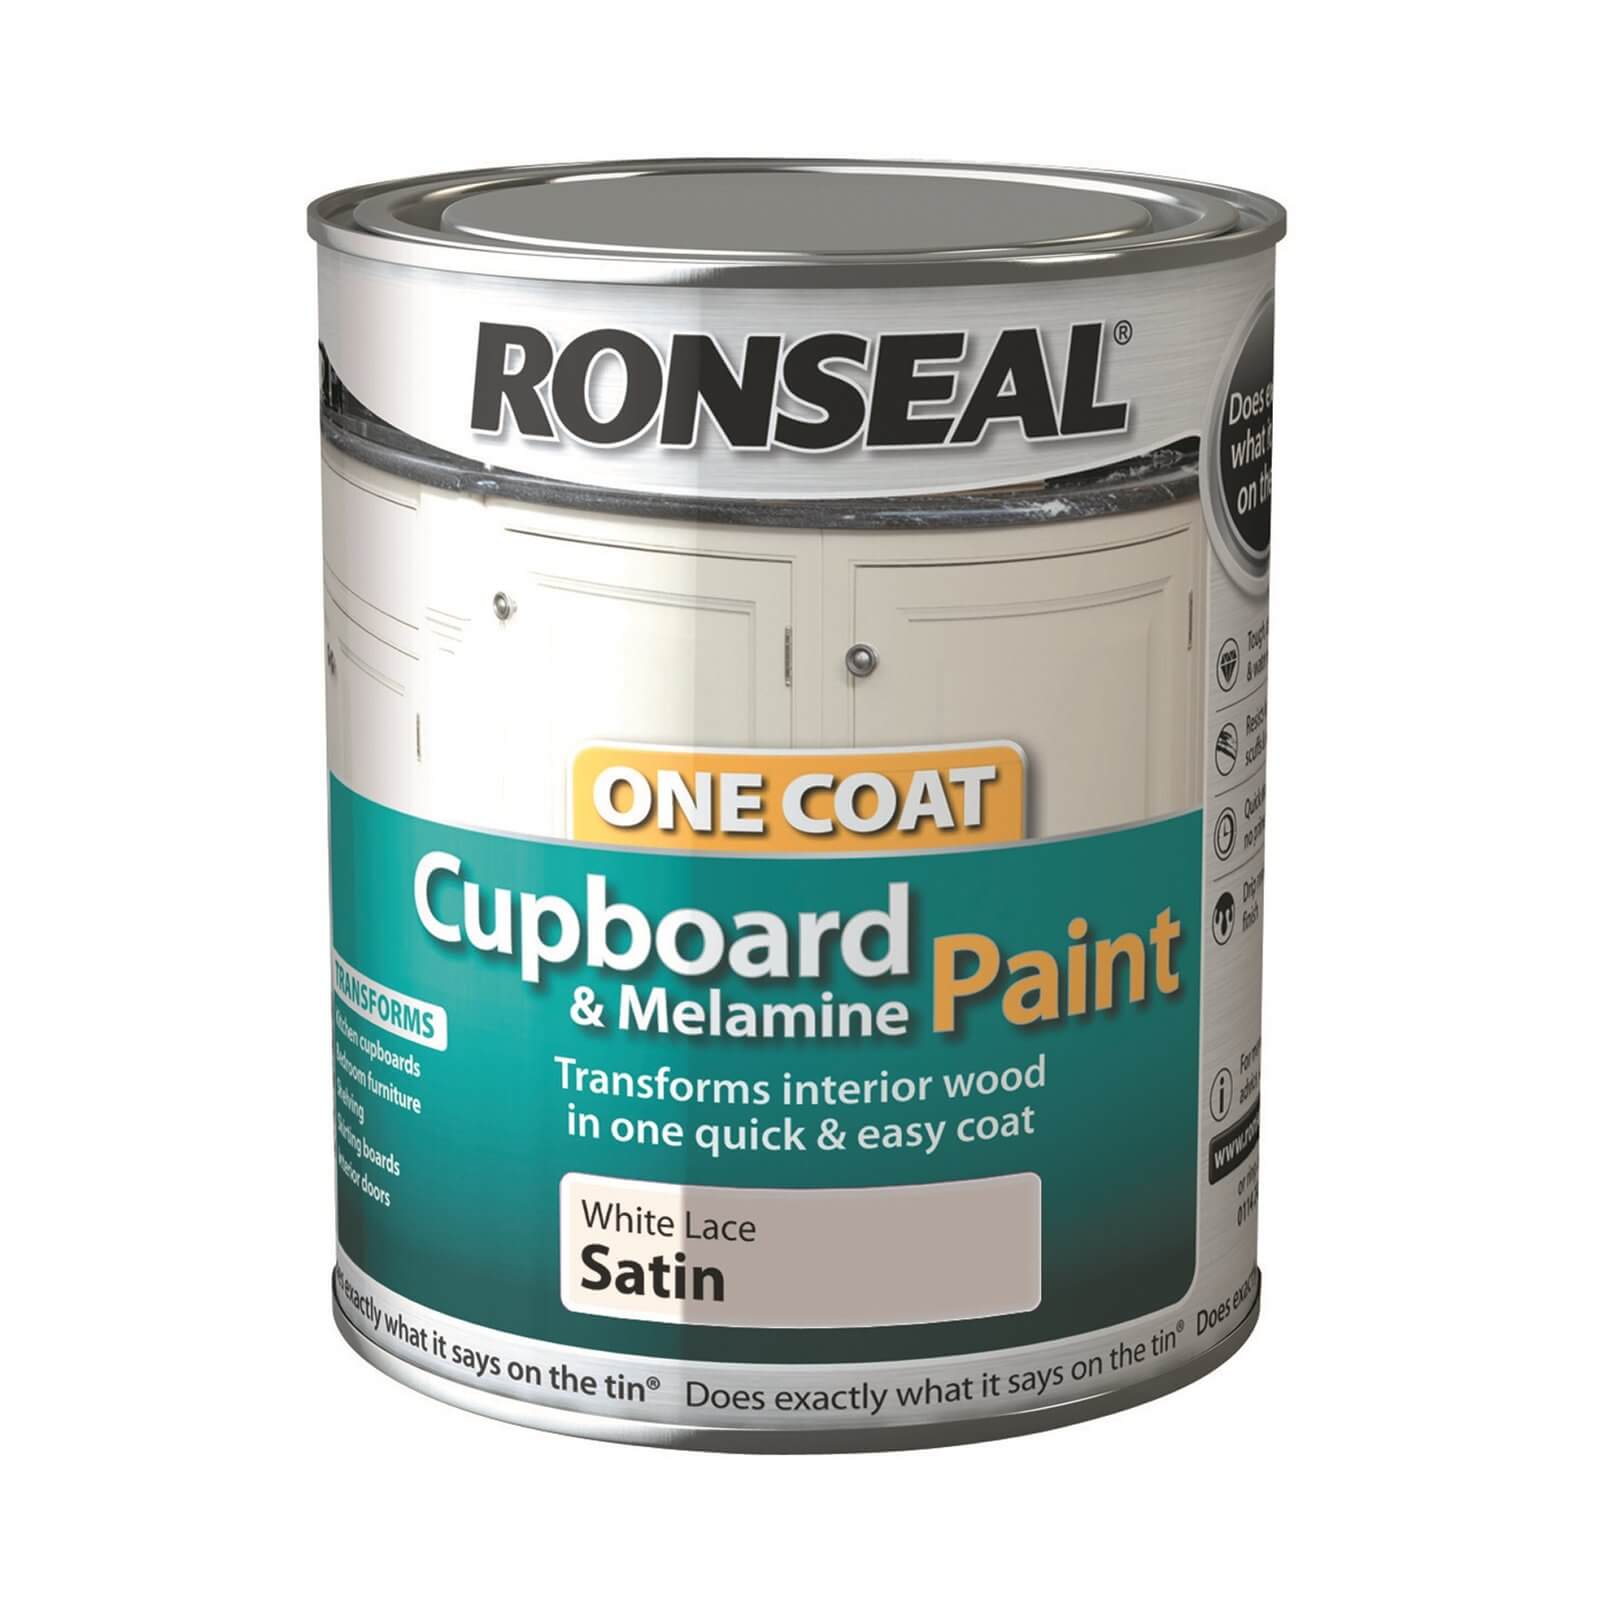 Ronseal One Coat Cupboard Paint White Lace Satin - 750ml